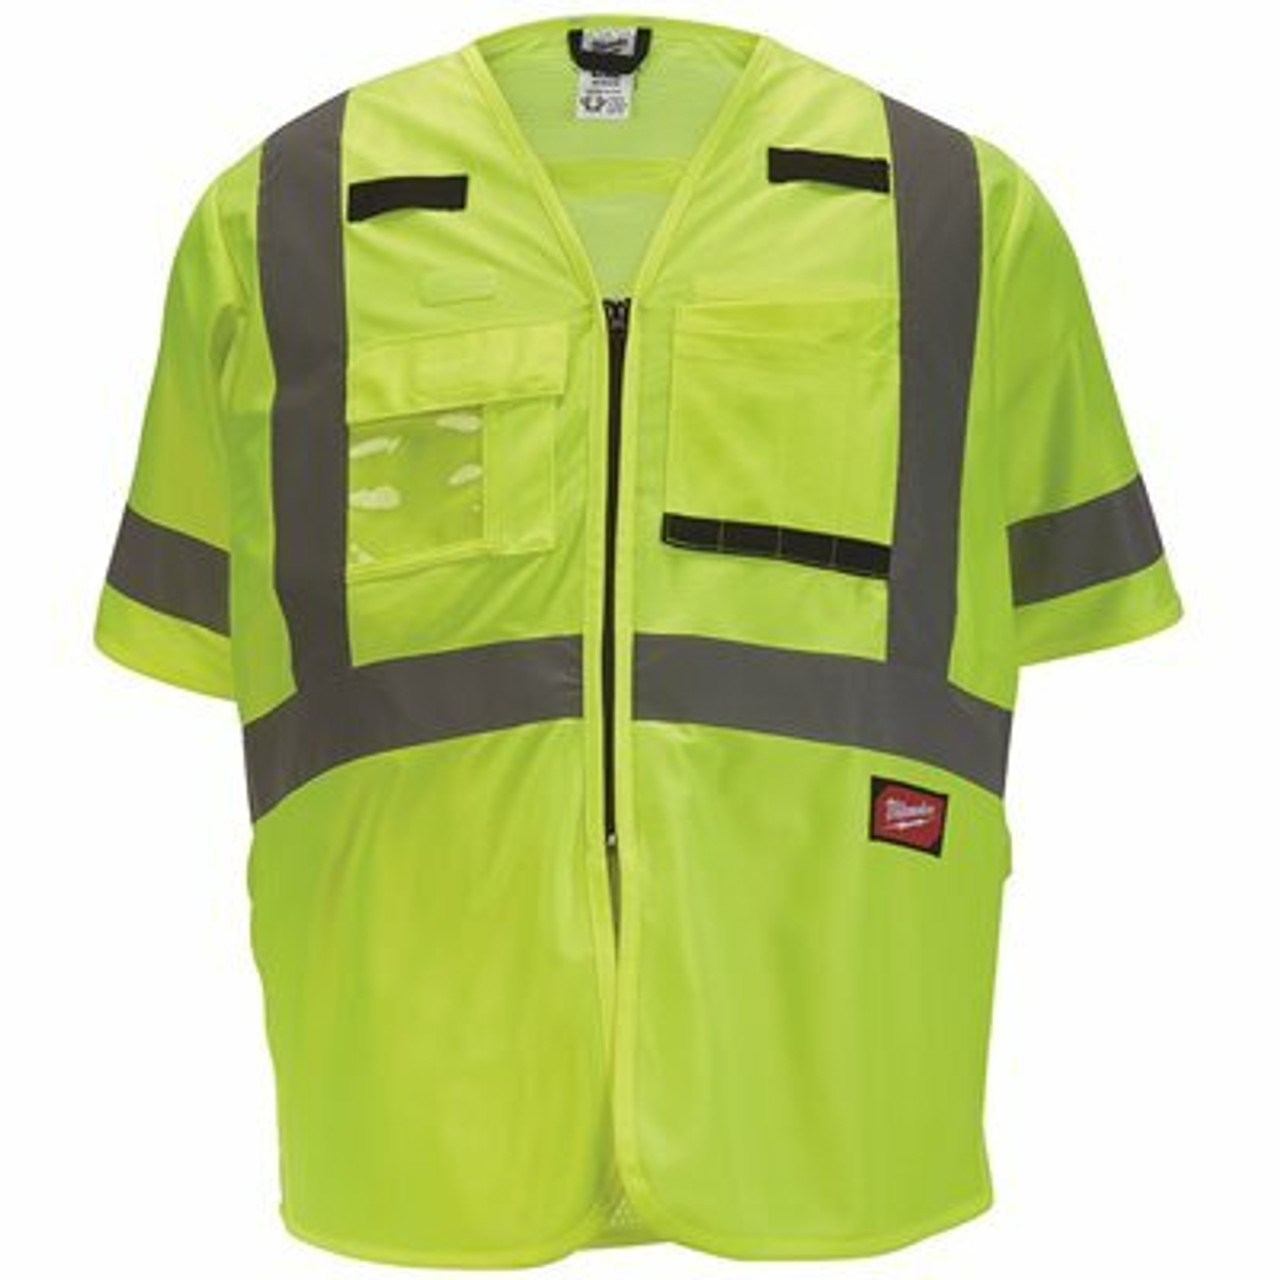 Milwaukee 2X-Large/3X-Large Yellow Class 3 High Visibility Safety Vest With 10-Pockets And Sleeves